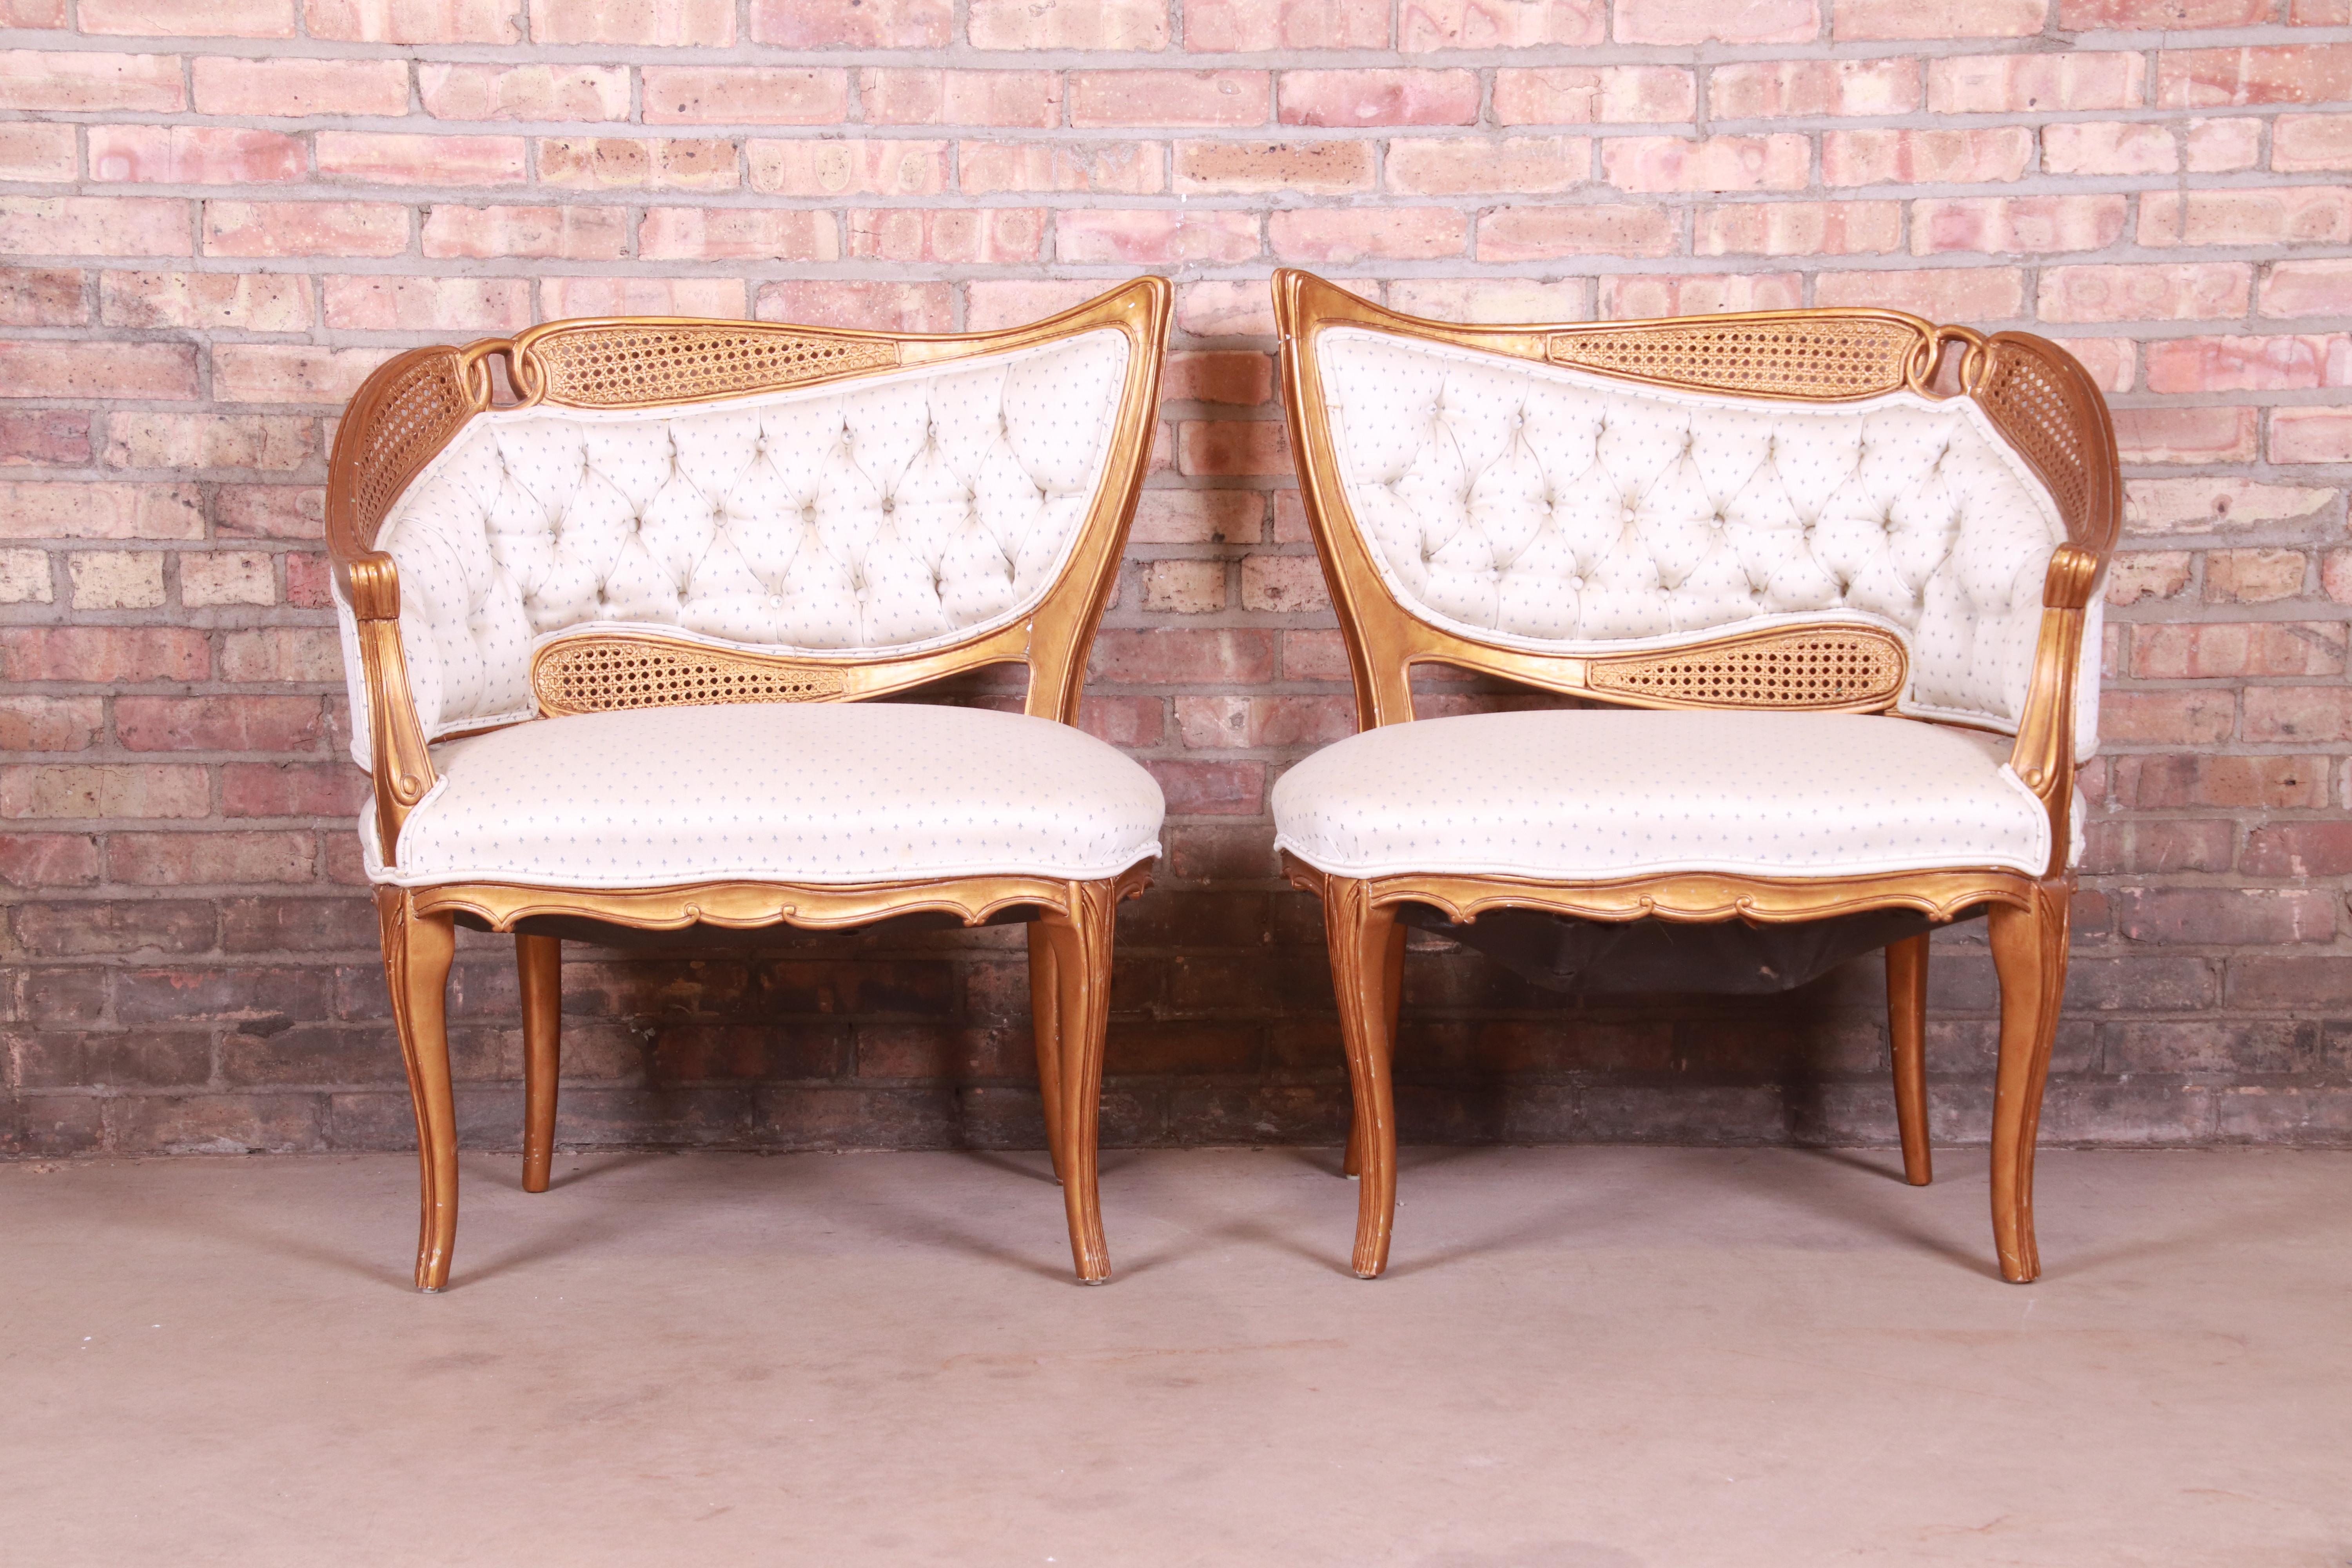 A gorgeous pair of French Rococo Louis XV style gilded fireside club chairs or lounge chairs

In the manner of Grosfeld House,

Mid-20th century

Giltwood and caning, with upholstered seats and backs.

Measures: 31